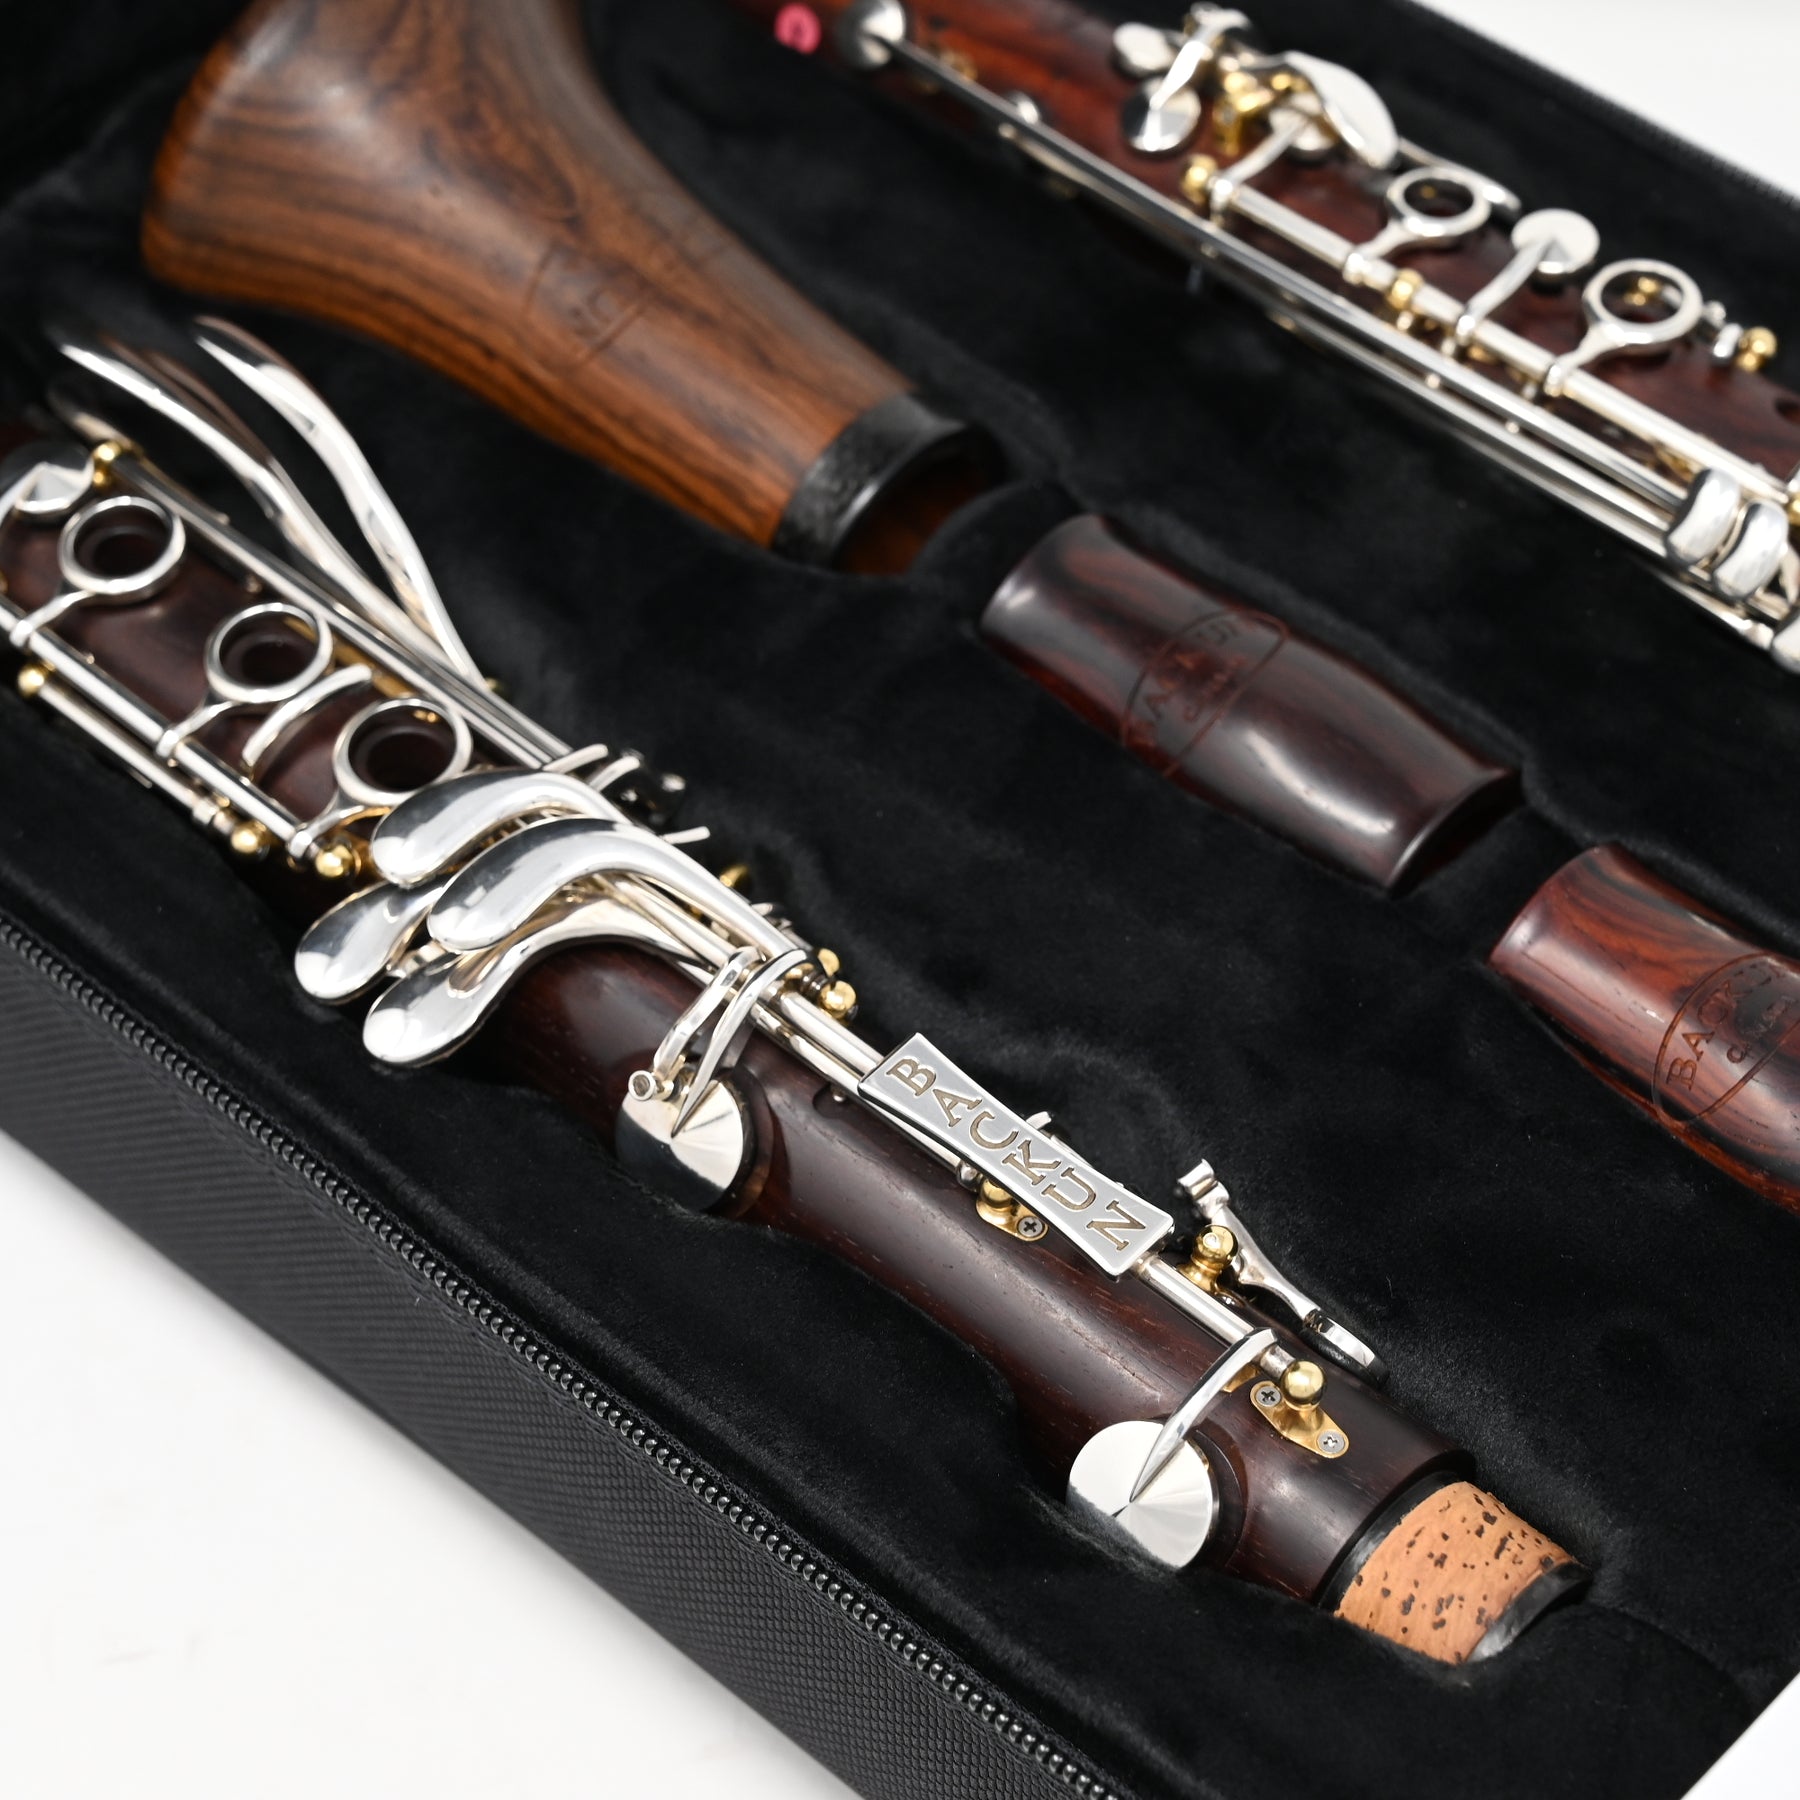 Pre-Owned Lumiere Bb Clarinet, Cocobolo with Gold Posts/Silver Keys (CL. 5)